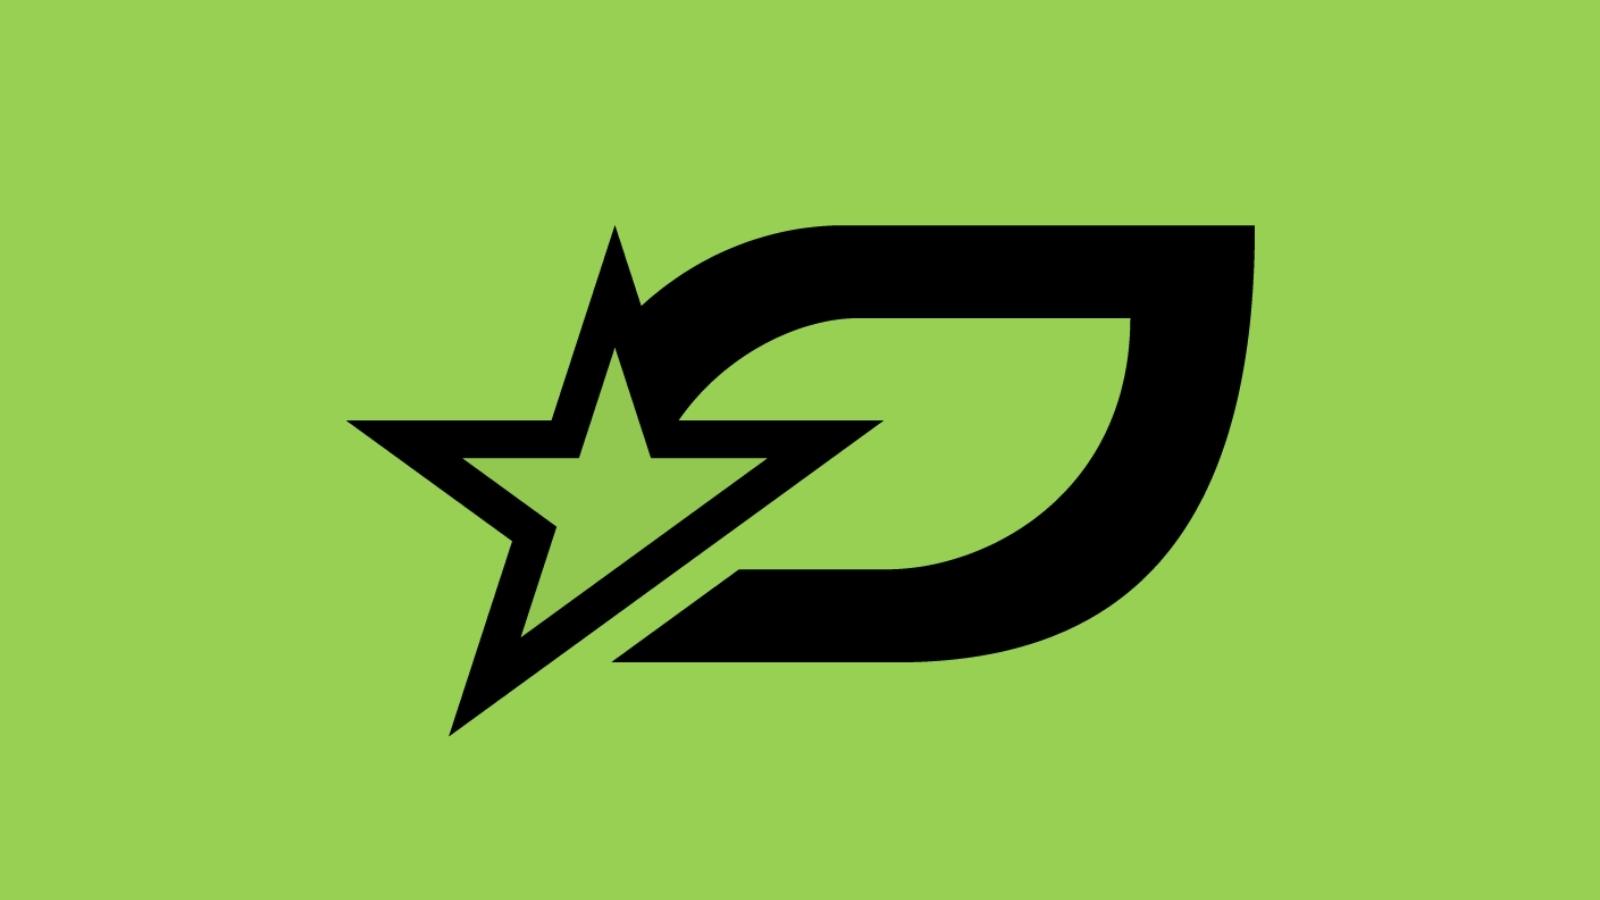 At not-so-long last: 4 takeaways from OpTic Texas' first 2022 Call